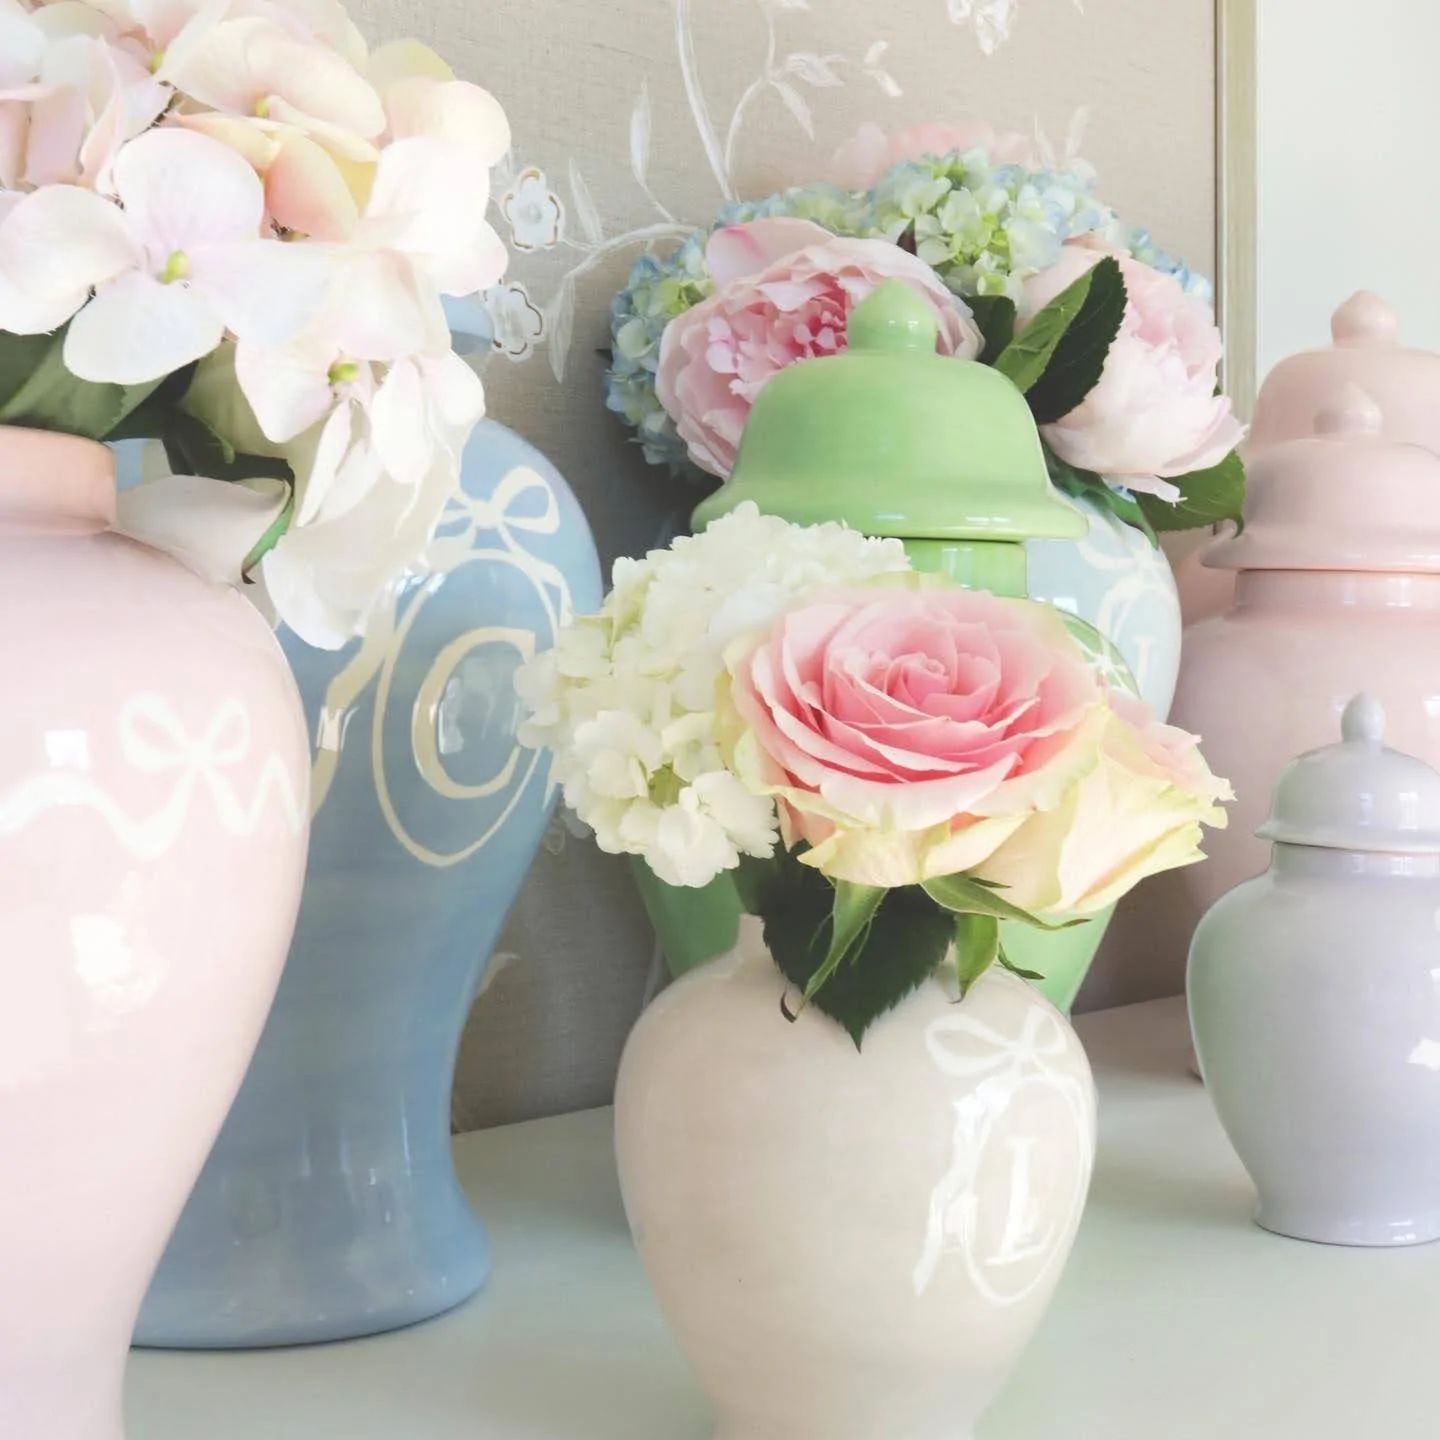 Lo Home x Veronika's Blushing | Lo Home by Lauren Haskell Designs